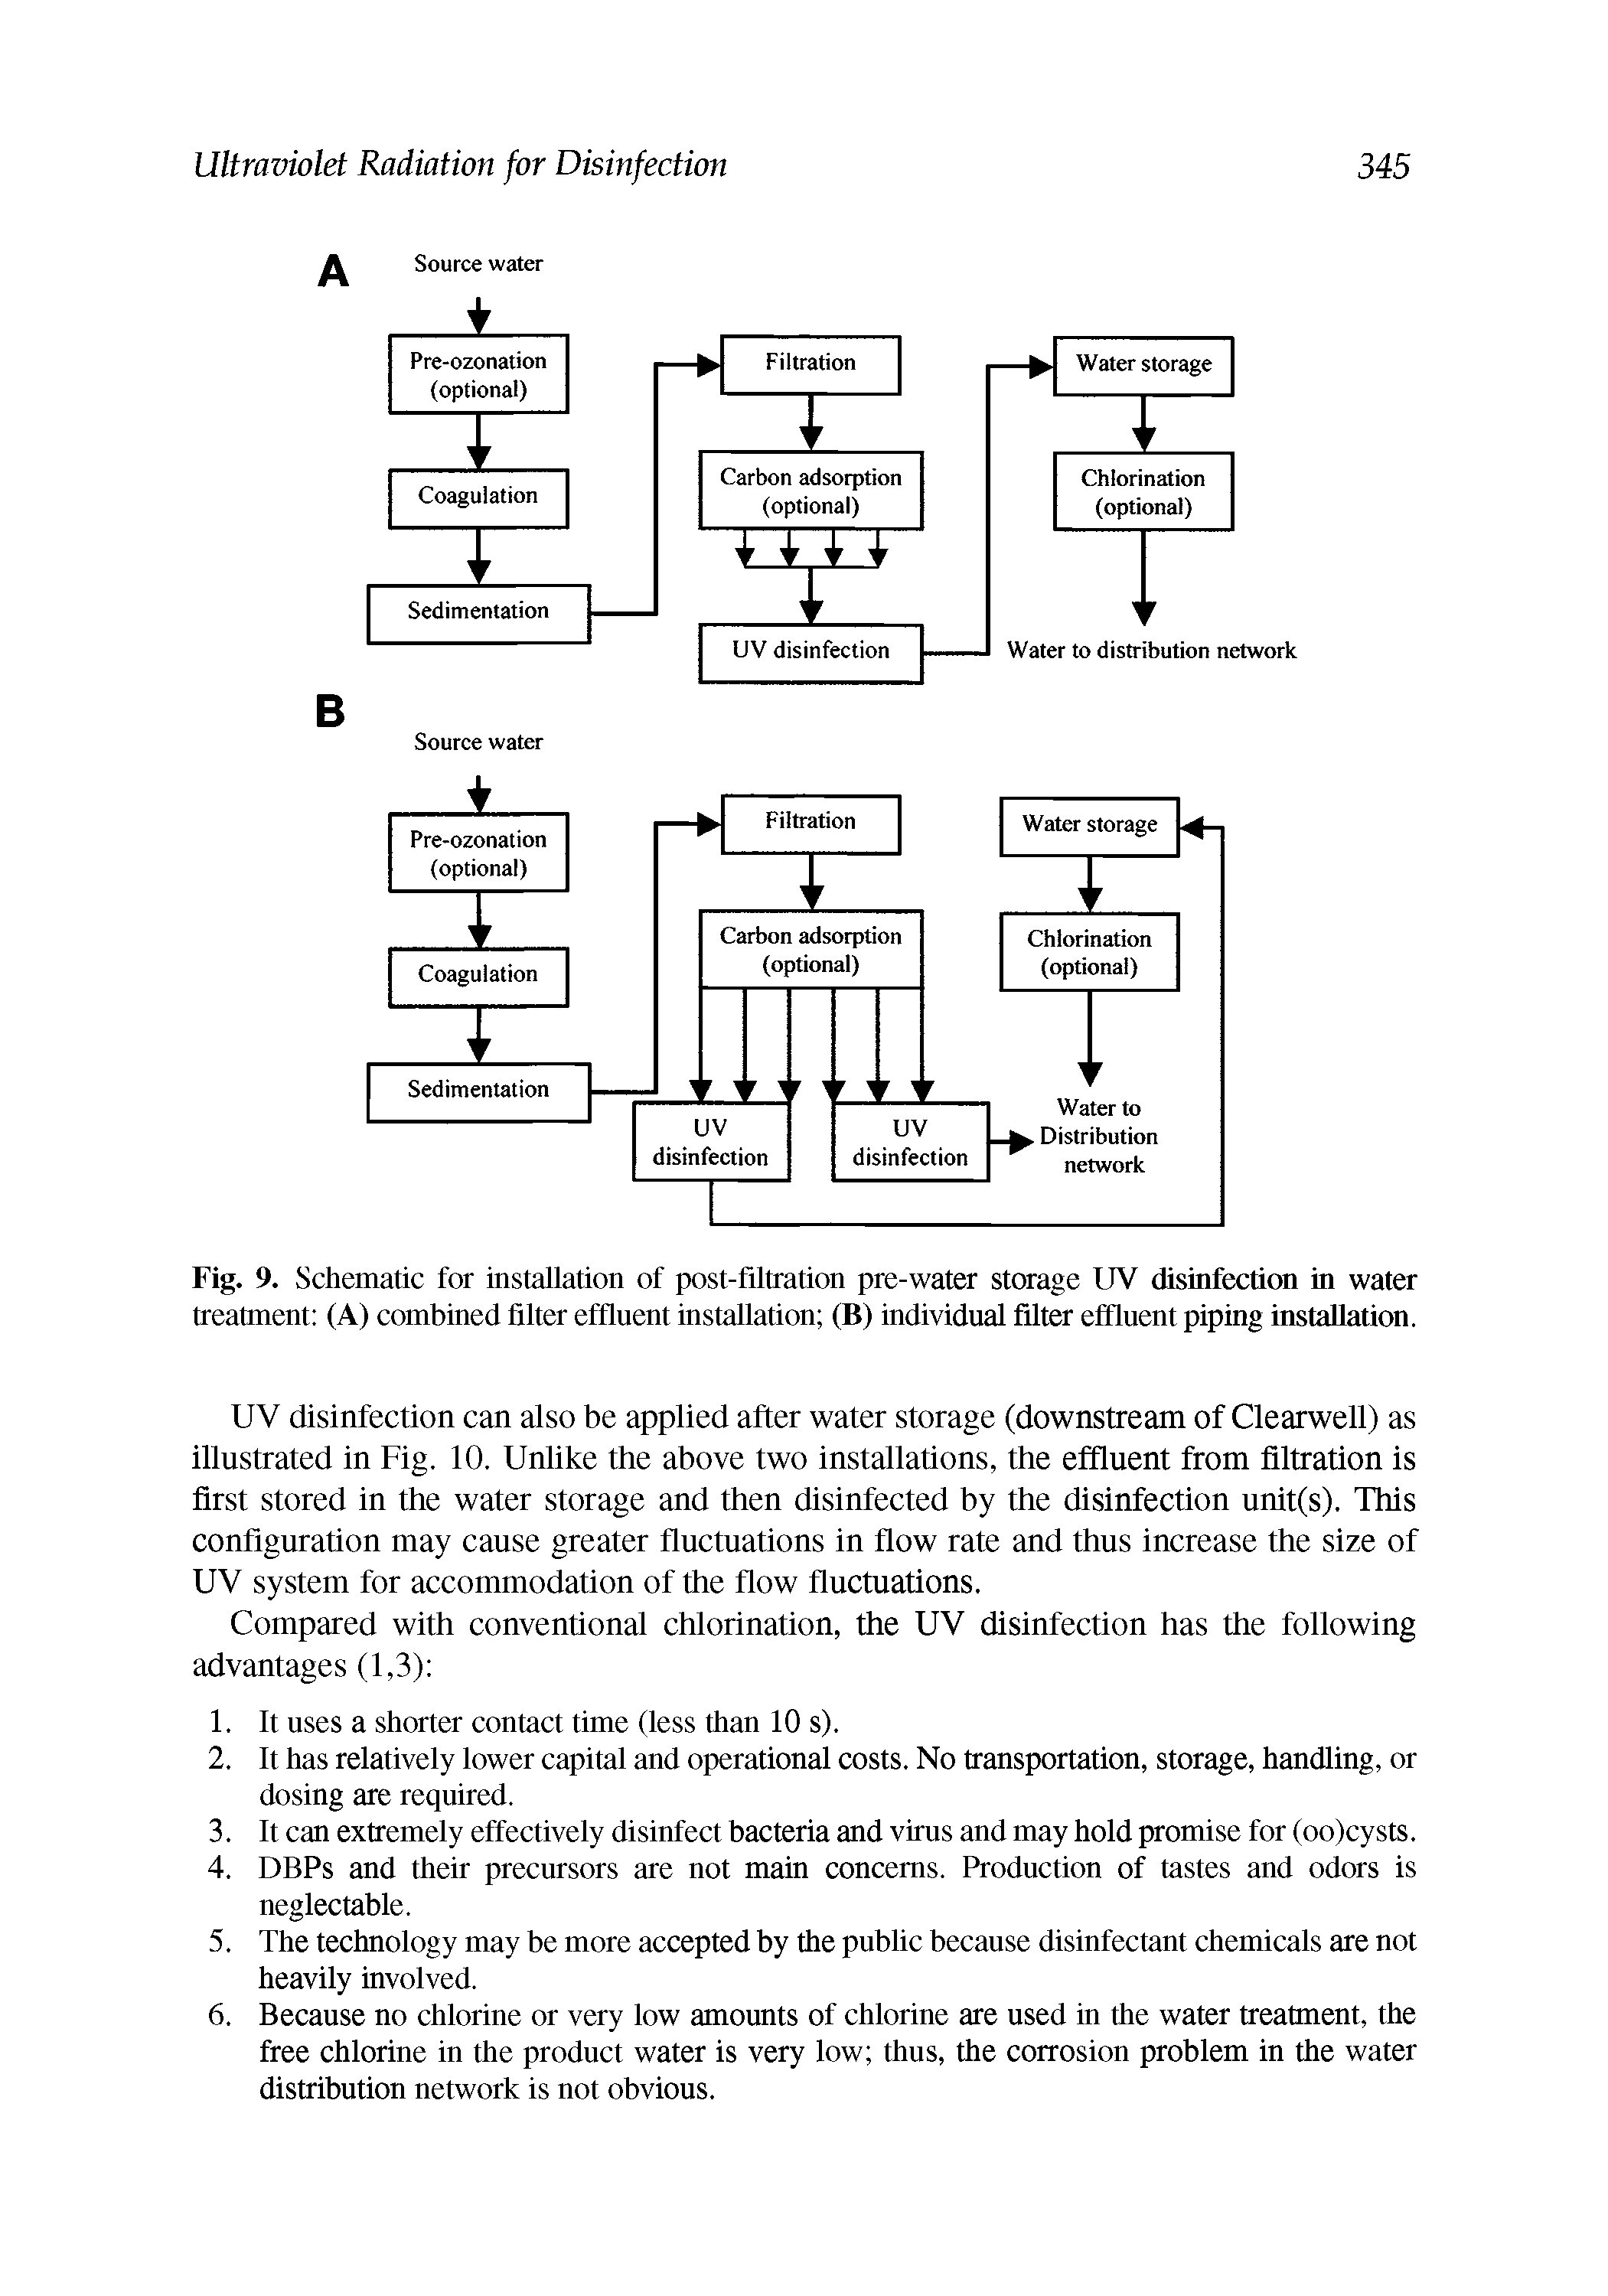 Fig. 9. Schematic for installation of post-filtration pre-water storage UV disinfection in water treatment (A) combined filter efflnent installation (B) individual filter efQnent piping installation.